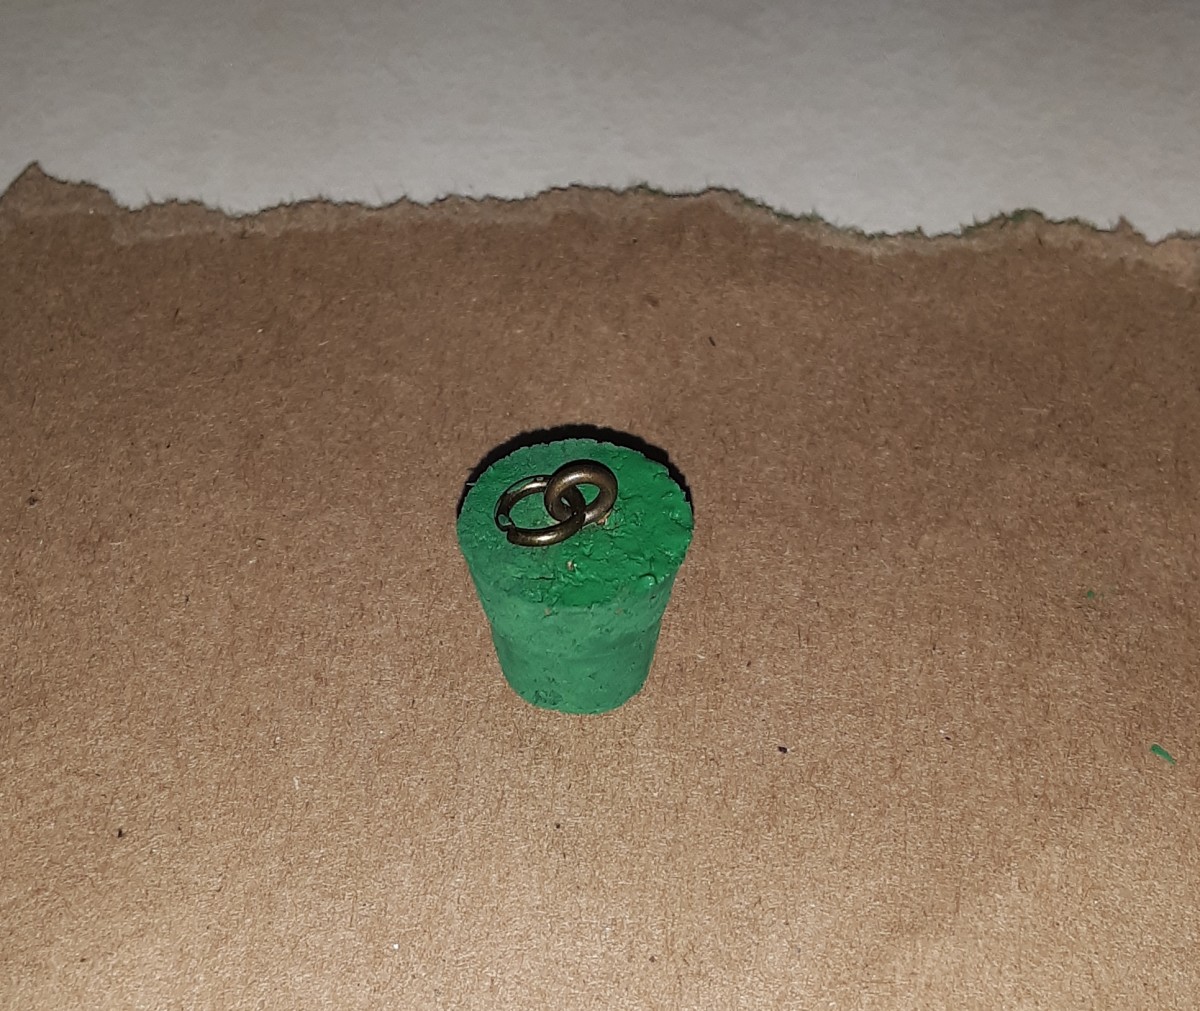 Paint cork green and let dry. Be careful not to smudge paint on metal rings.